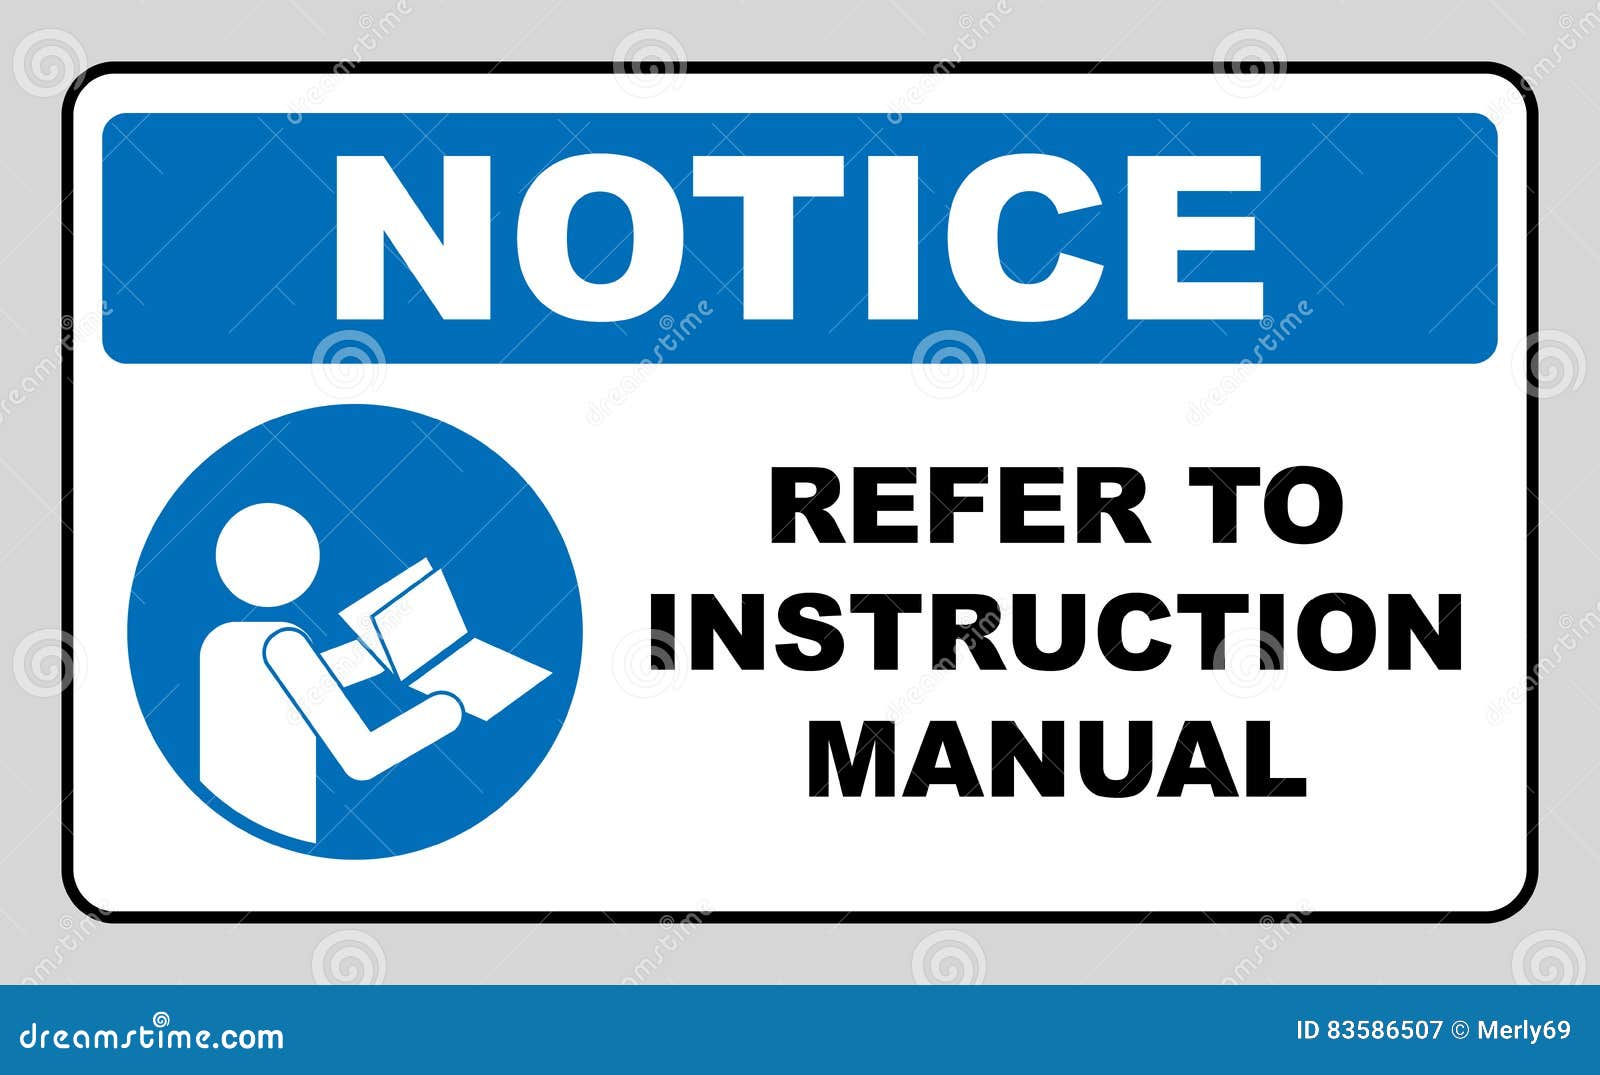 refer to instruction manual booklet